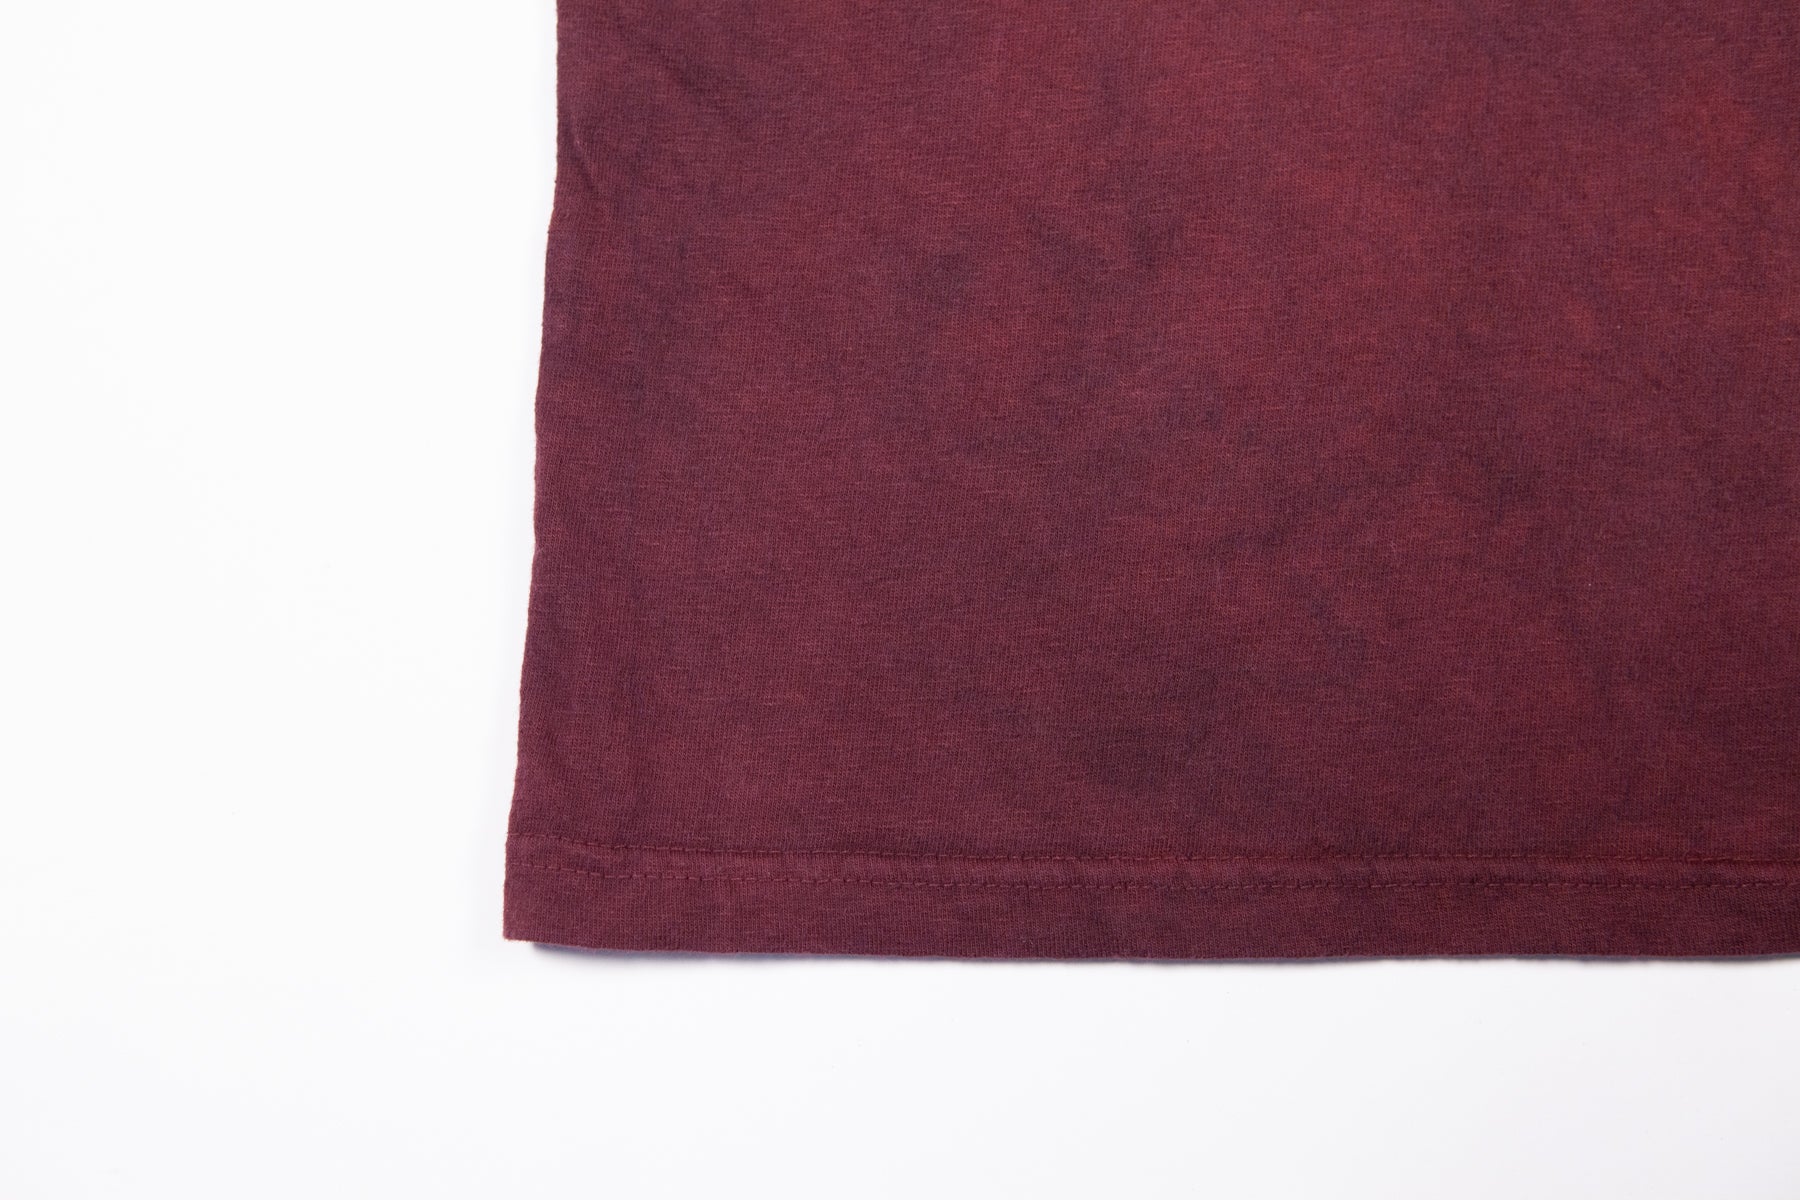 A close-up of crewneck t-shirt made in the USA and dyed with madder root standing laying flat on a white background